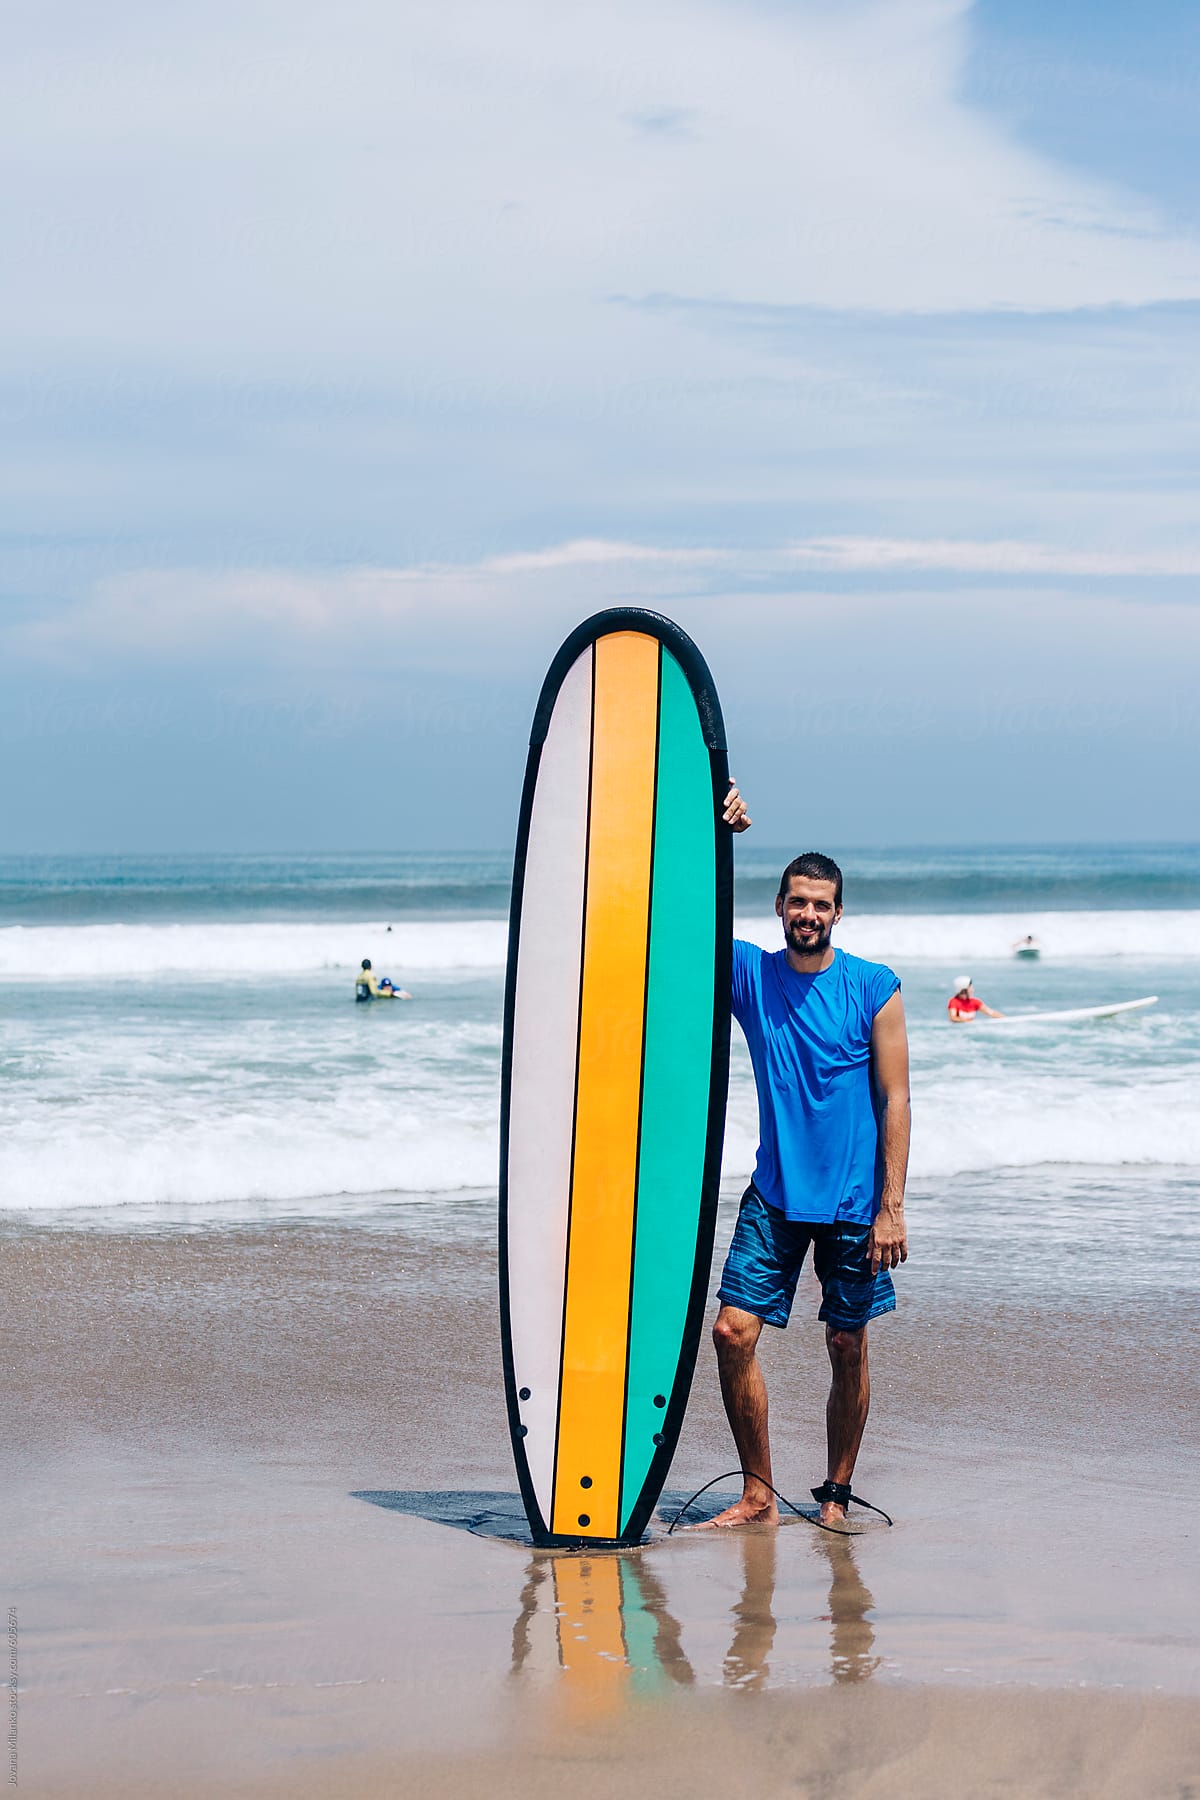 Man holding longboard at the surfing beach